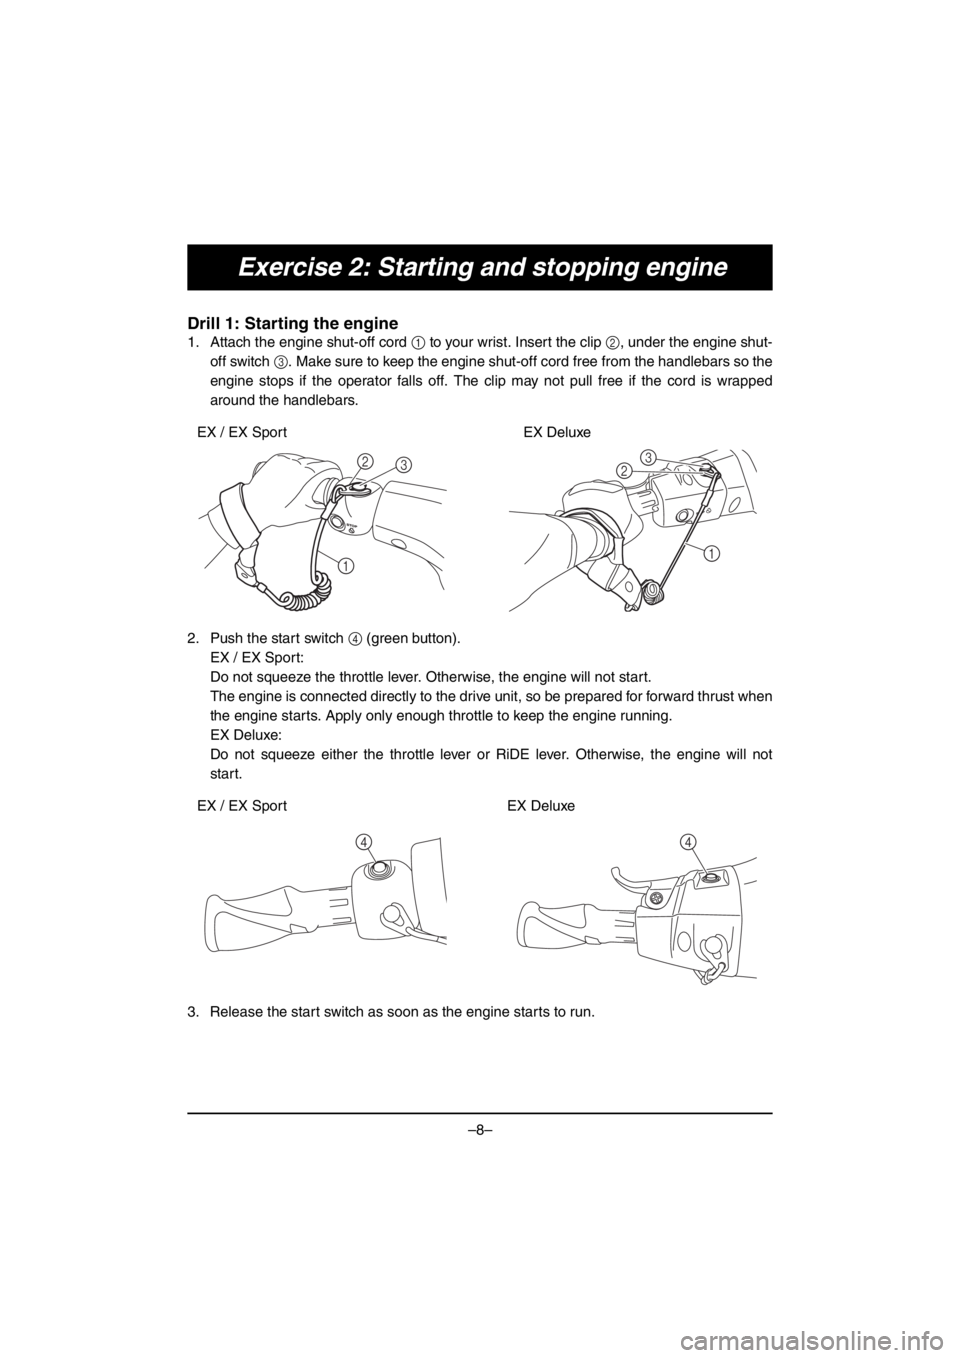 YAMAHA EX SPORT 2017  Manuale duso (in Italian) –8–
Exercise 2: Starting and stopping engine
Drill 1: Starting the engine
1. Attach the engine shut-off cord 1 to your wrist. Insert the clip 2, under the engine shut-
off switch 3. Make sure to k